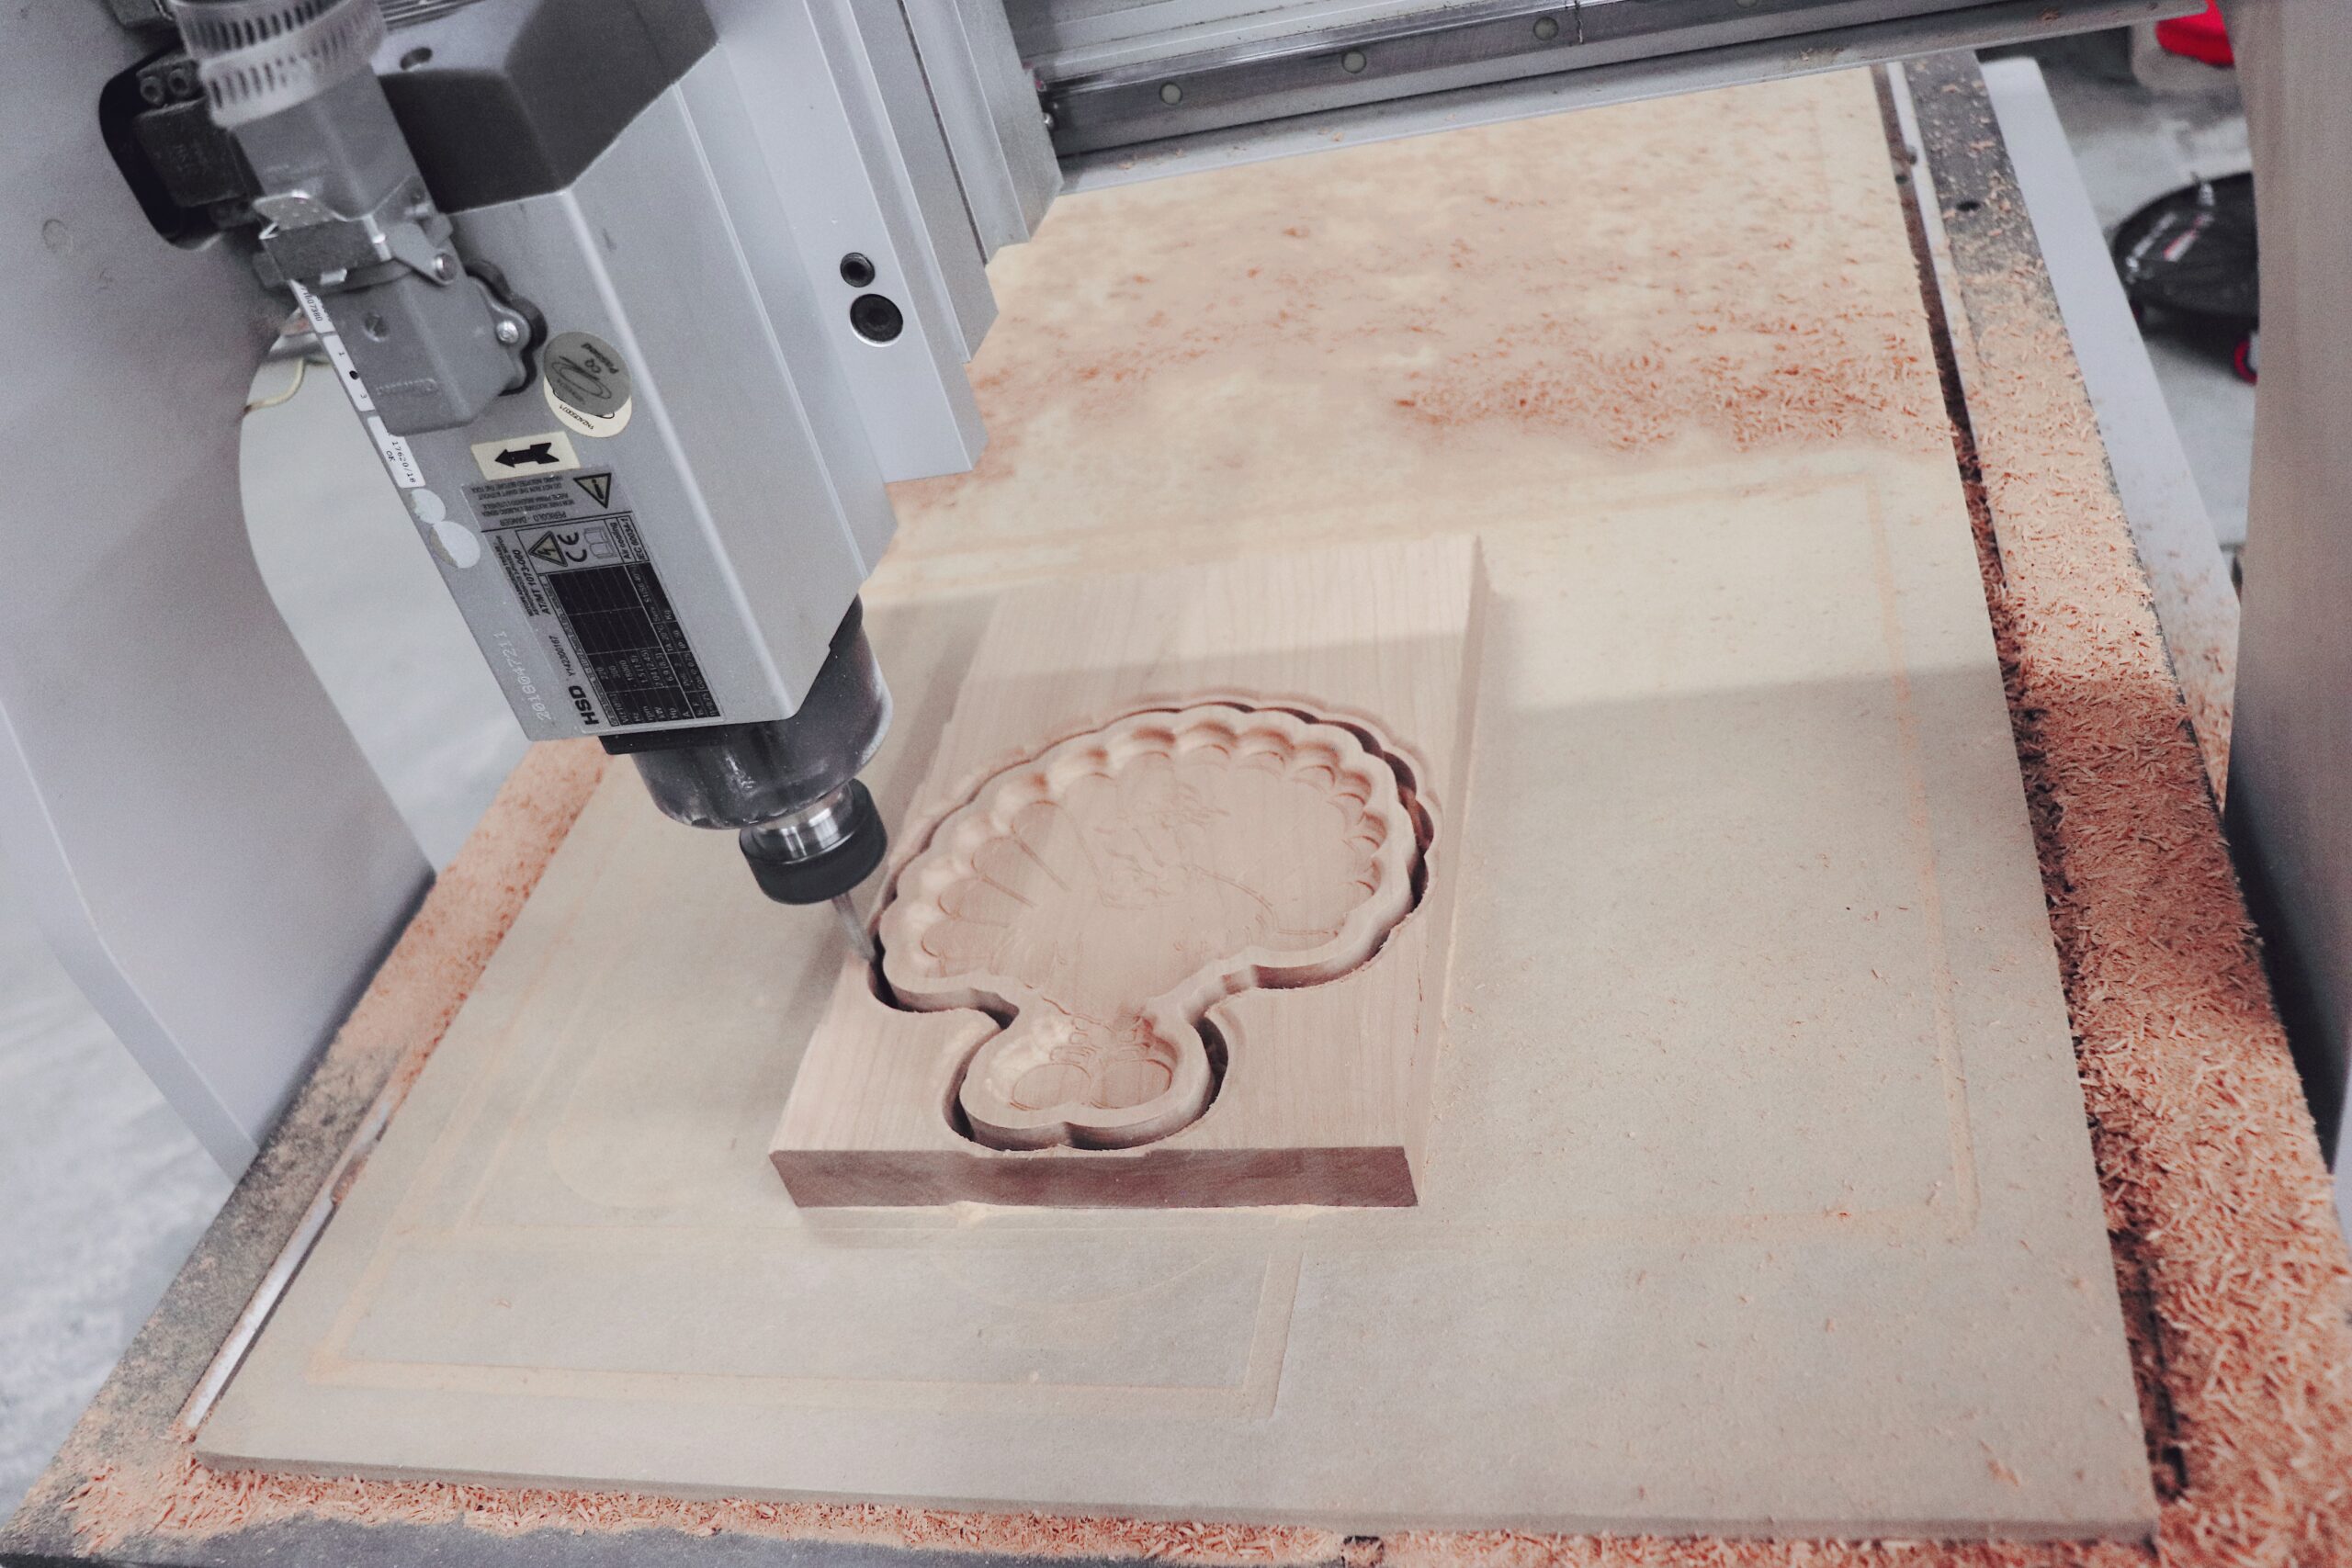 How CNC Technology Prepares Students for their Futures